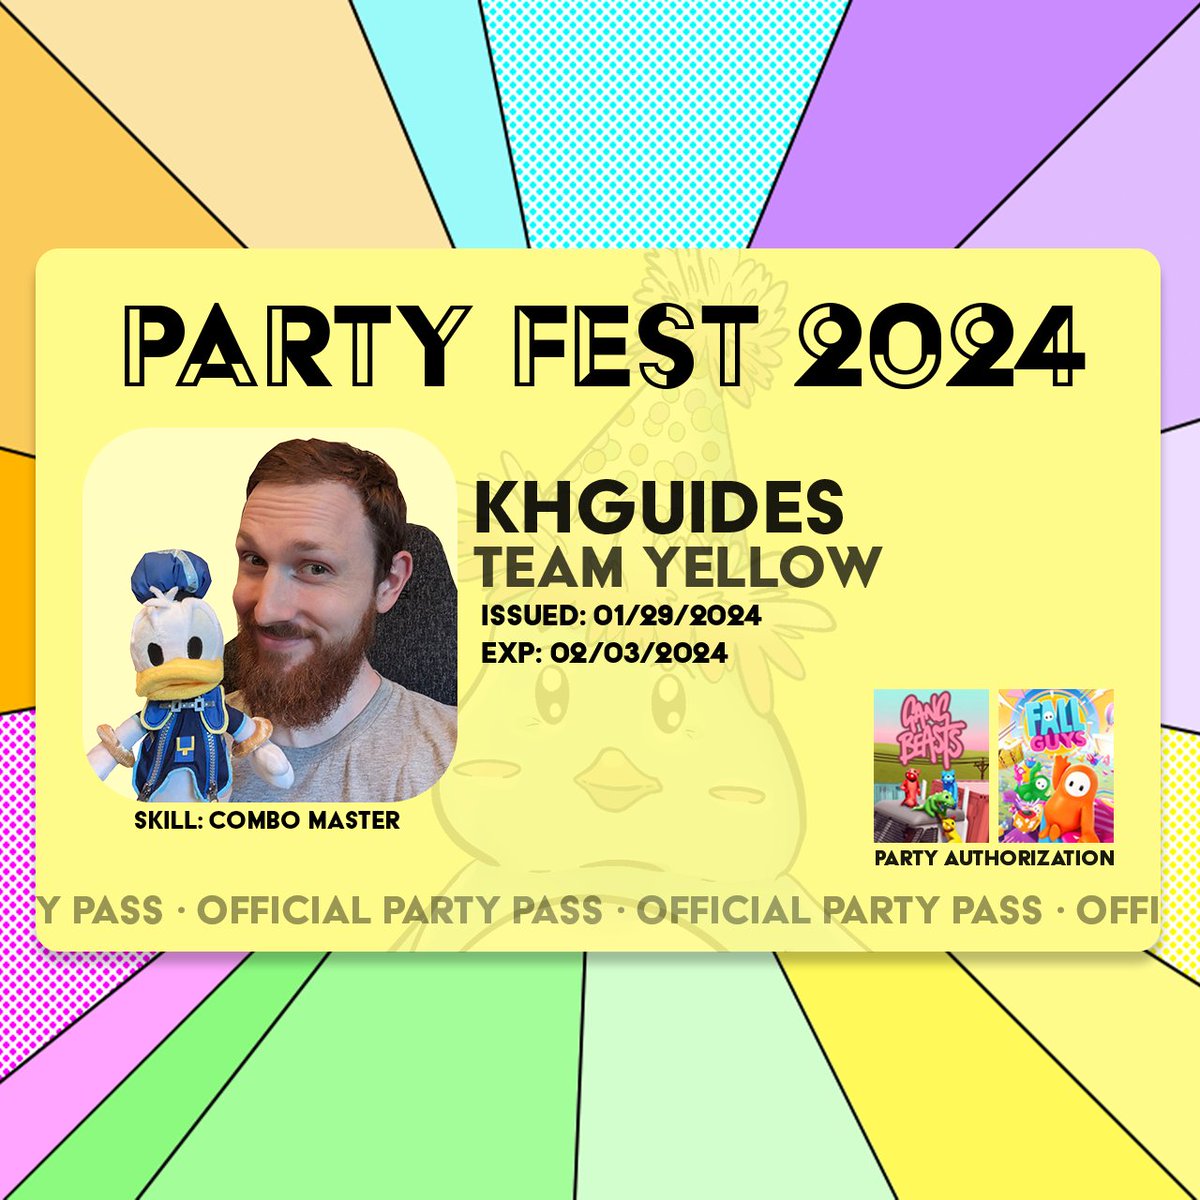 I'm super excited to participate in Gang Beasts as a member of ⭐ Team Yellow ⭐ during #PartyFest tonight! 🥳

Join me at 6pm Central on the @radiantgardenrs Twitch channel and cheer on the teams!